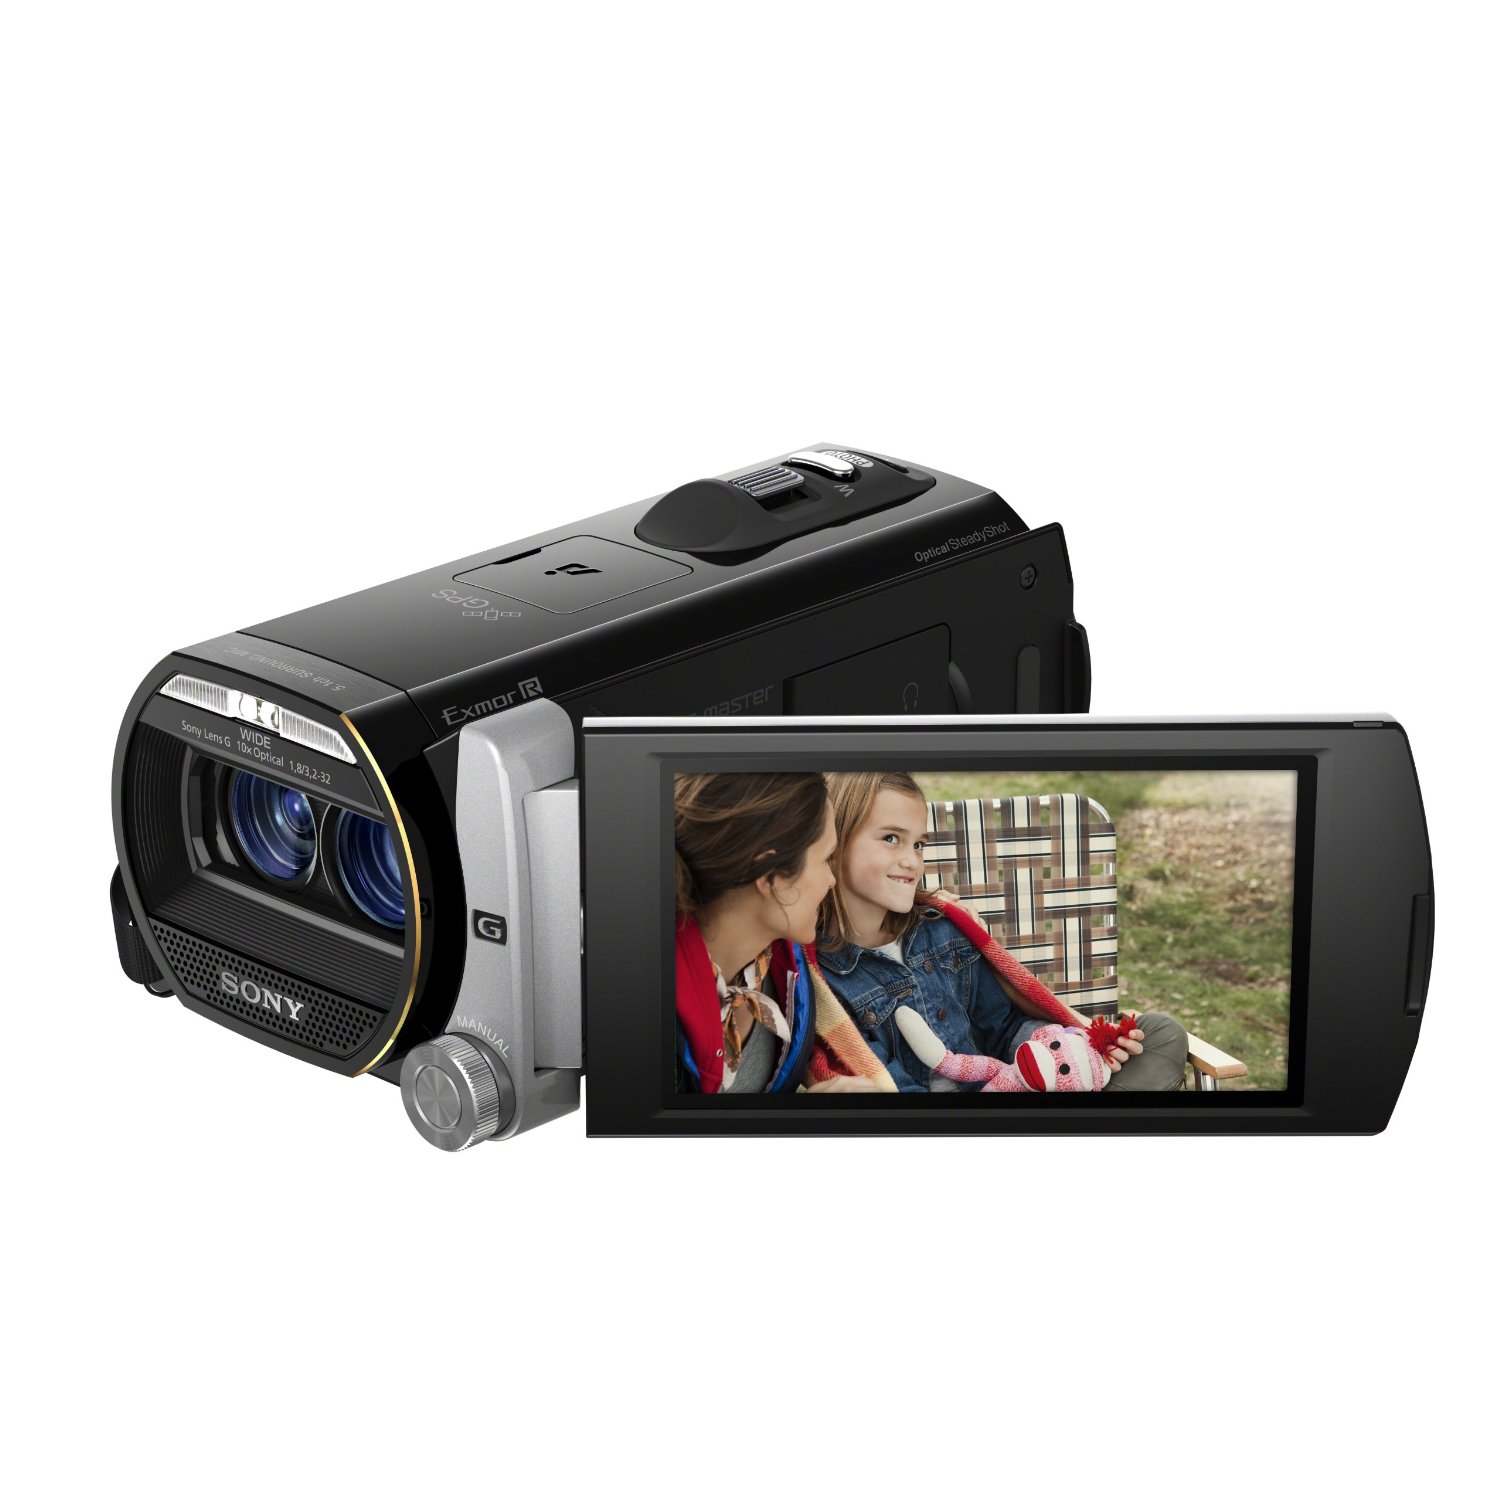 http://thetechjournal.com/wp-content/uploads/images/1203/1333213211-sony-hdrtd20v-hd-handycam-204-mp-3d-camcorder-5.jpg